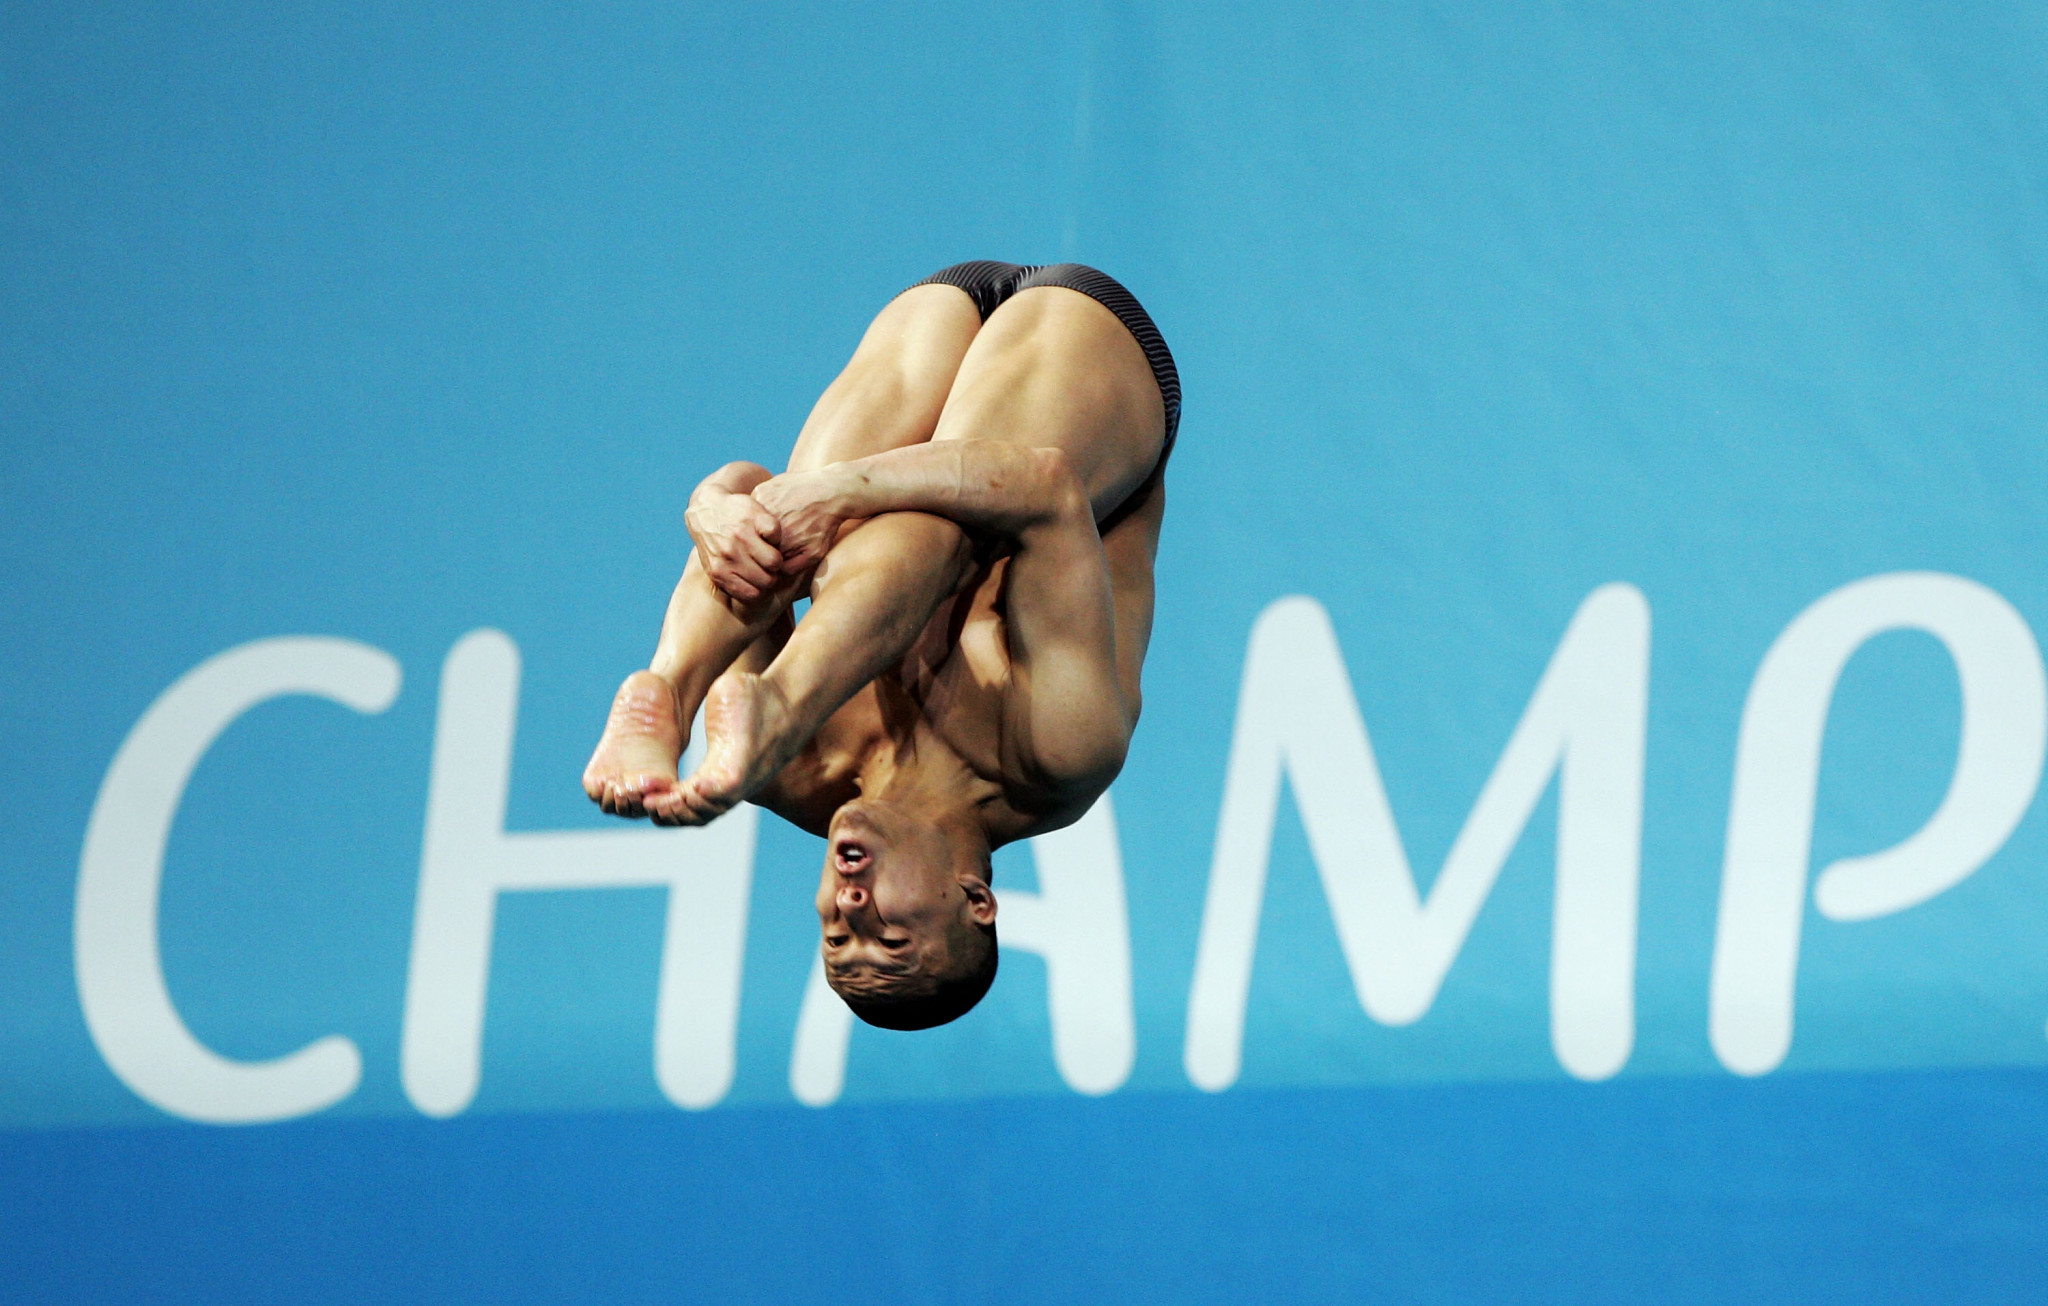 Ken Terauchi has been a mainstay in men's diving for more than two decades ©Getty Images